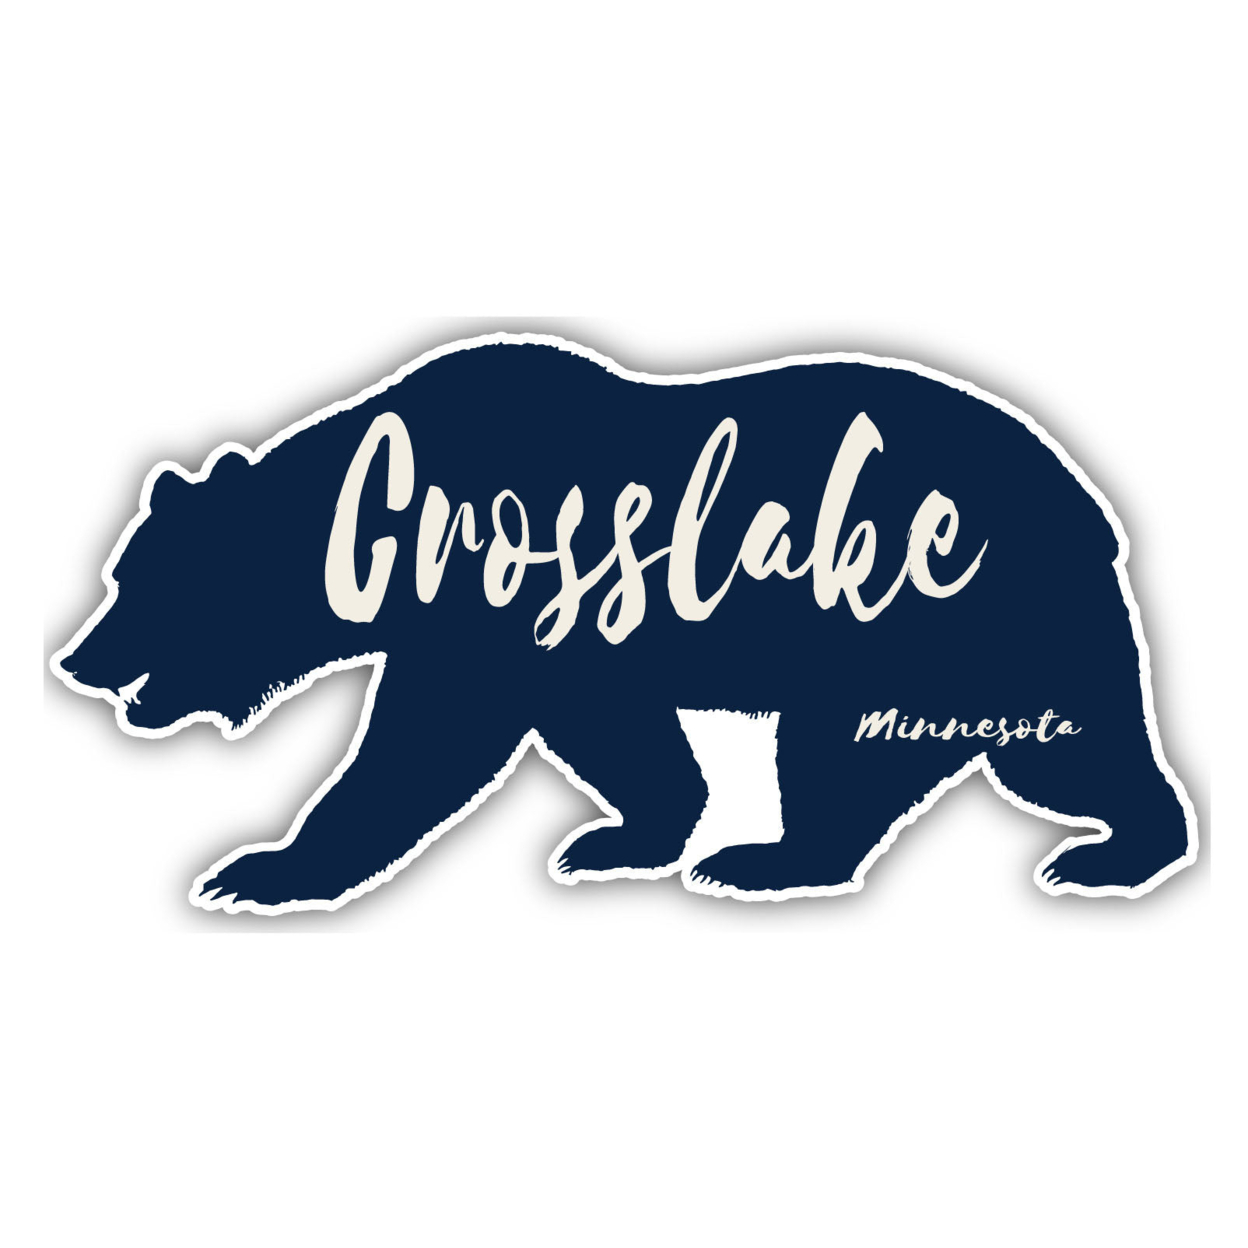 Crosslake Minnesota Souvenir Decorative Stickers (Choose Theme And Size) - Single Unit, 4-Inch, Great Outdoors